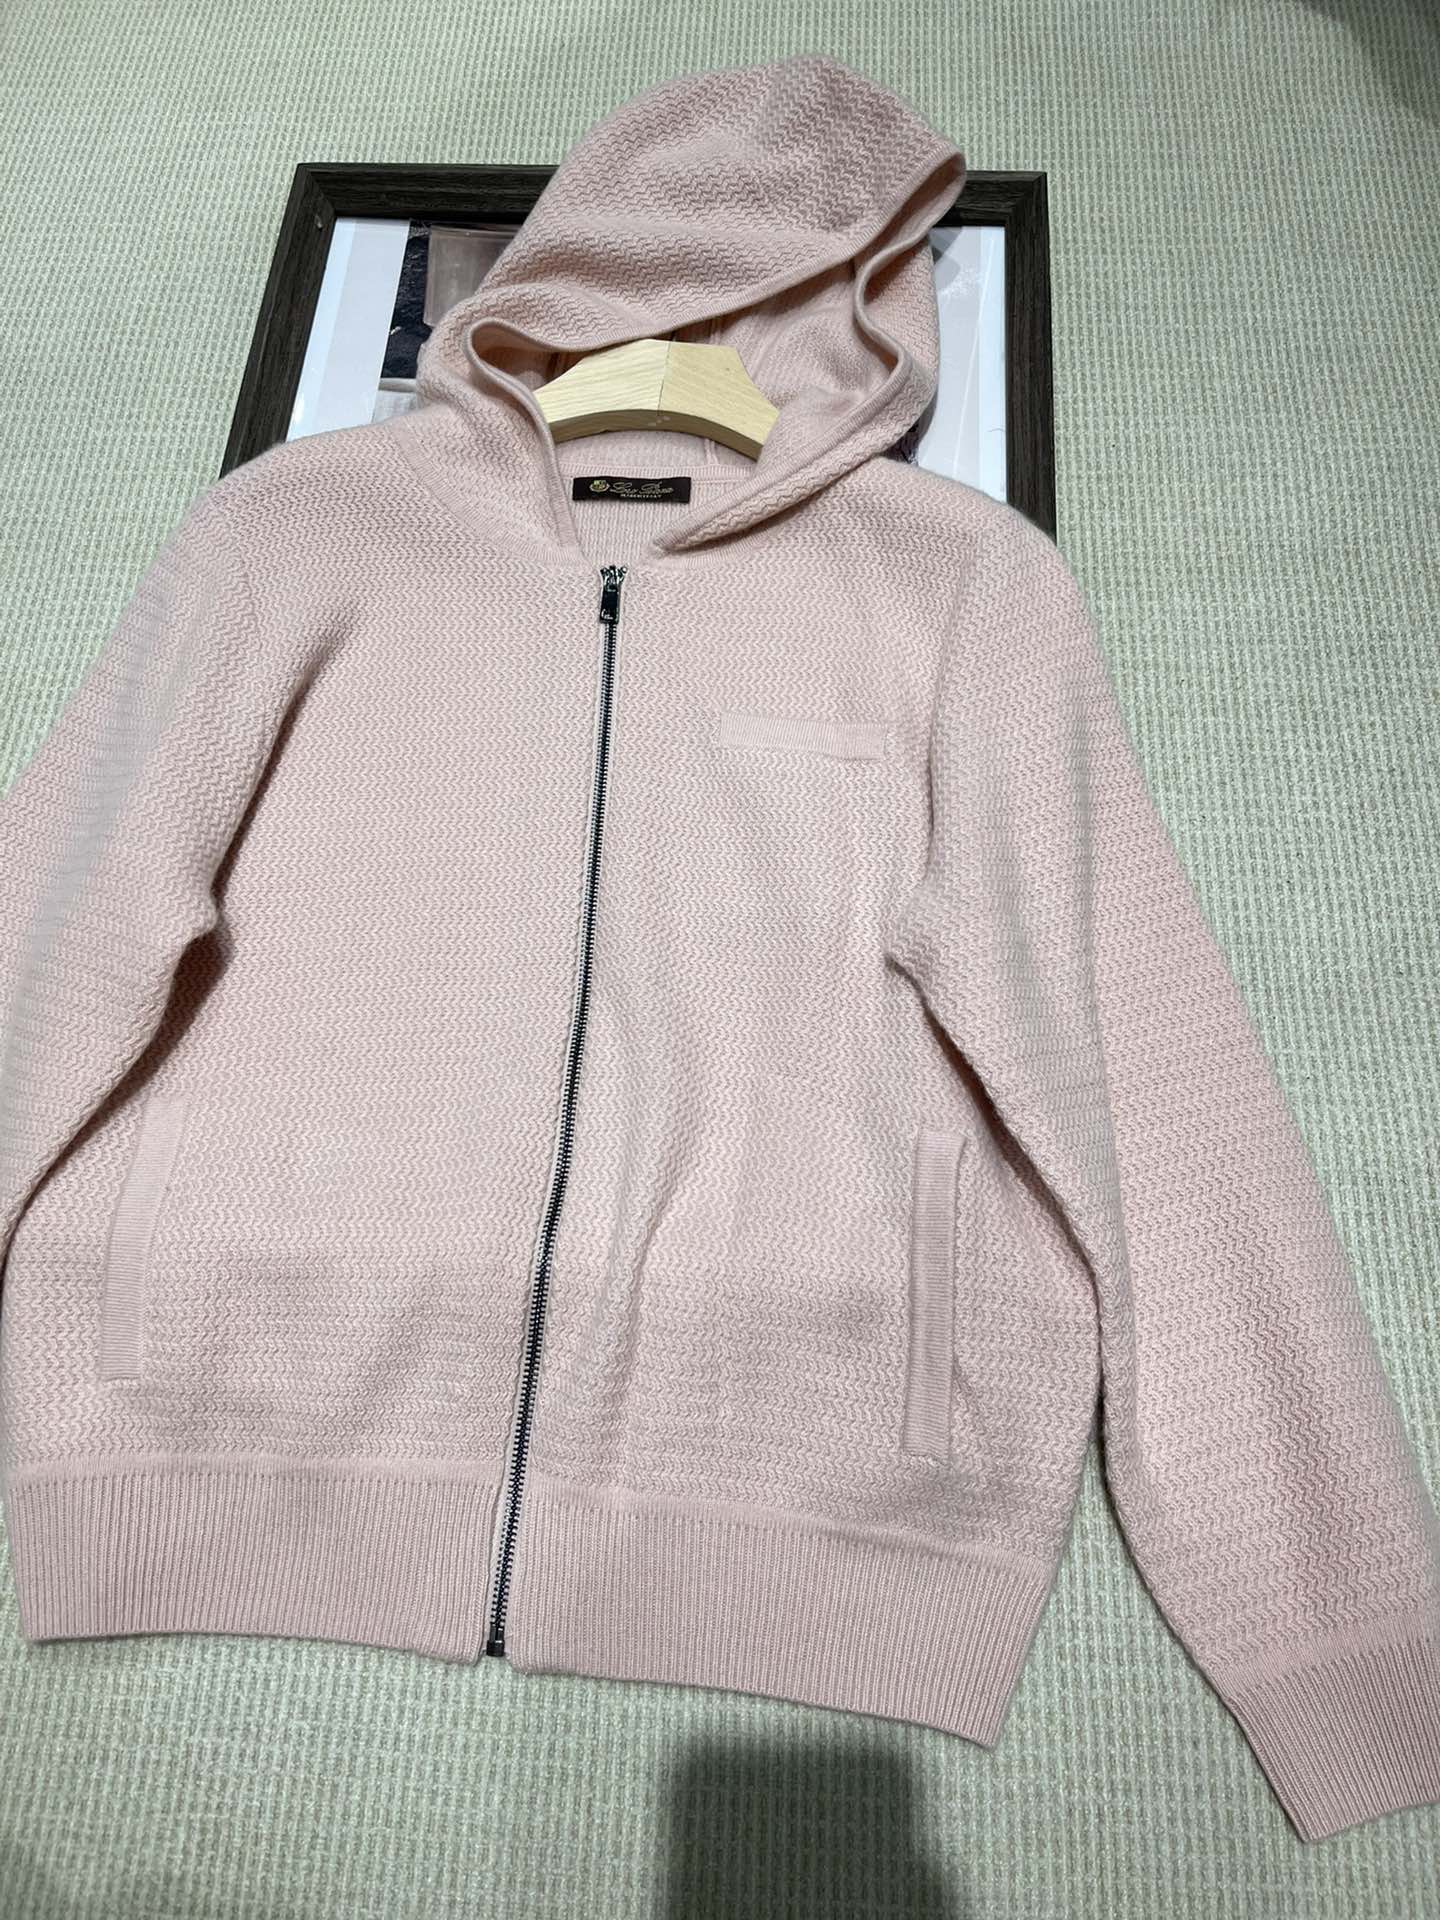 Womens Sweaters Winter loro Water Ripple Cashmere Pink White Gray Hooded Cardigans piana